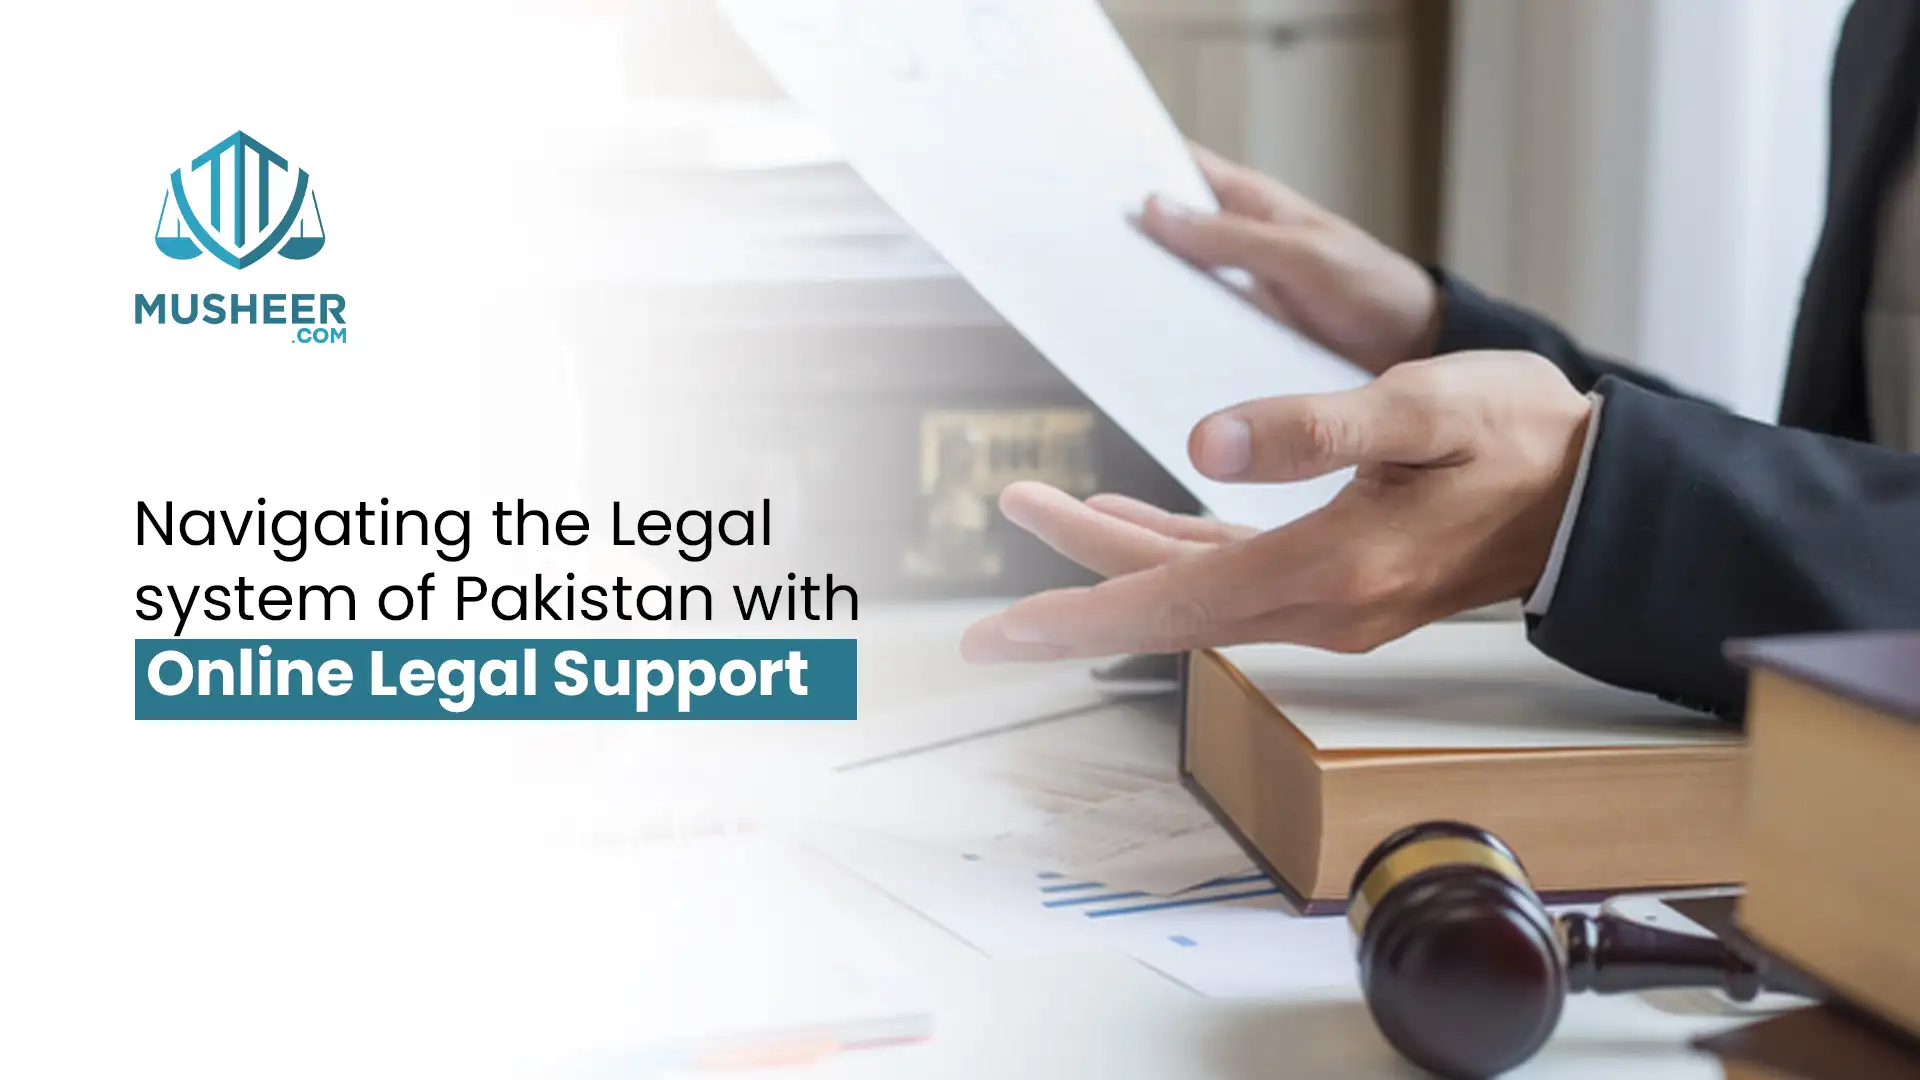 Navigating the Legal System of Pakistan with Online Legal Support